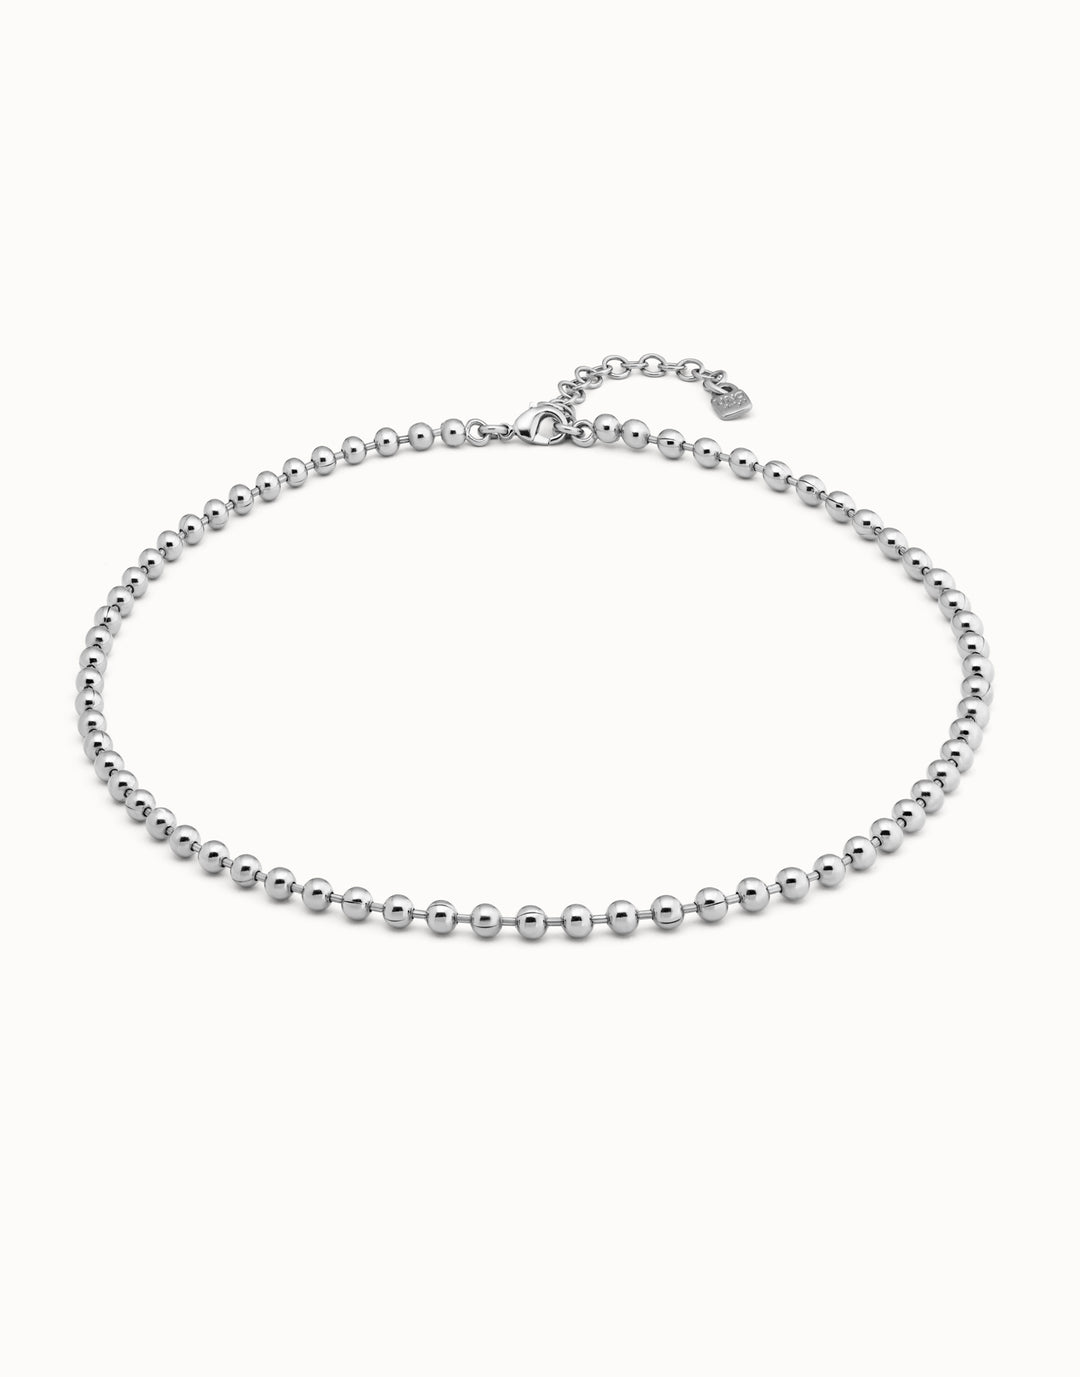 EMOTIONS NECKLACE - SILVER